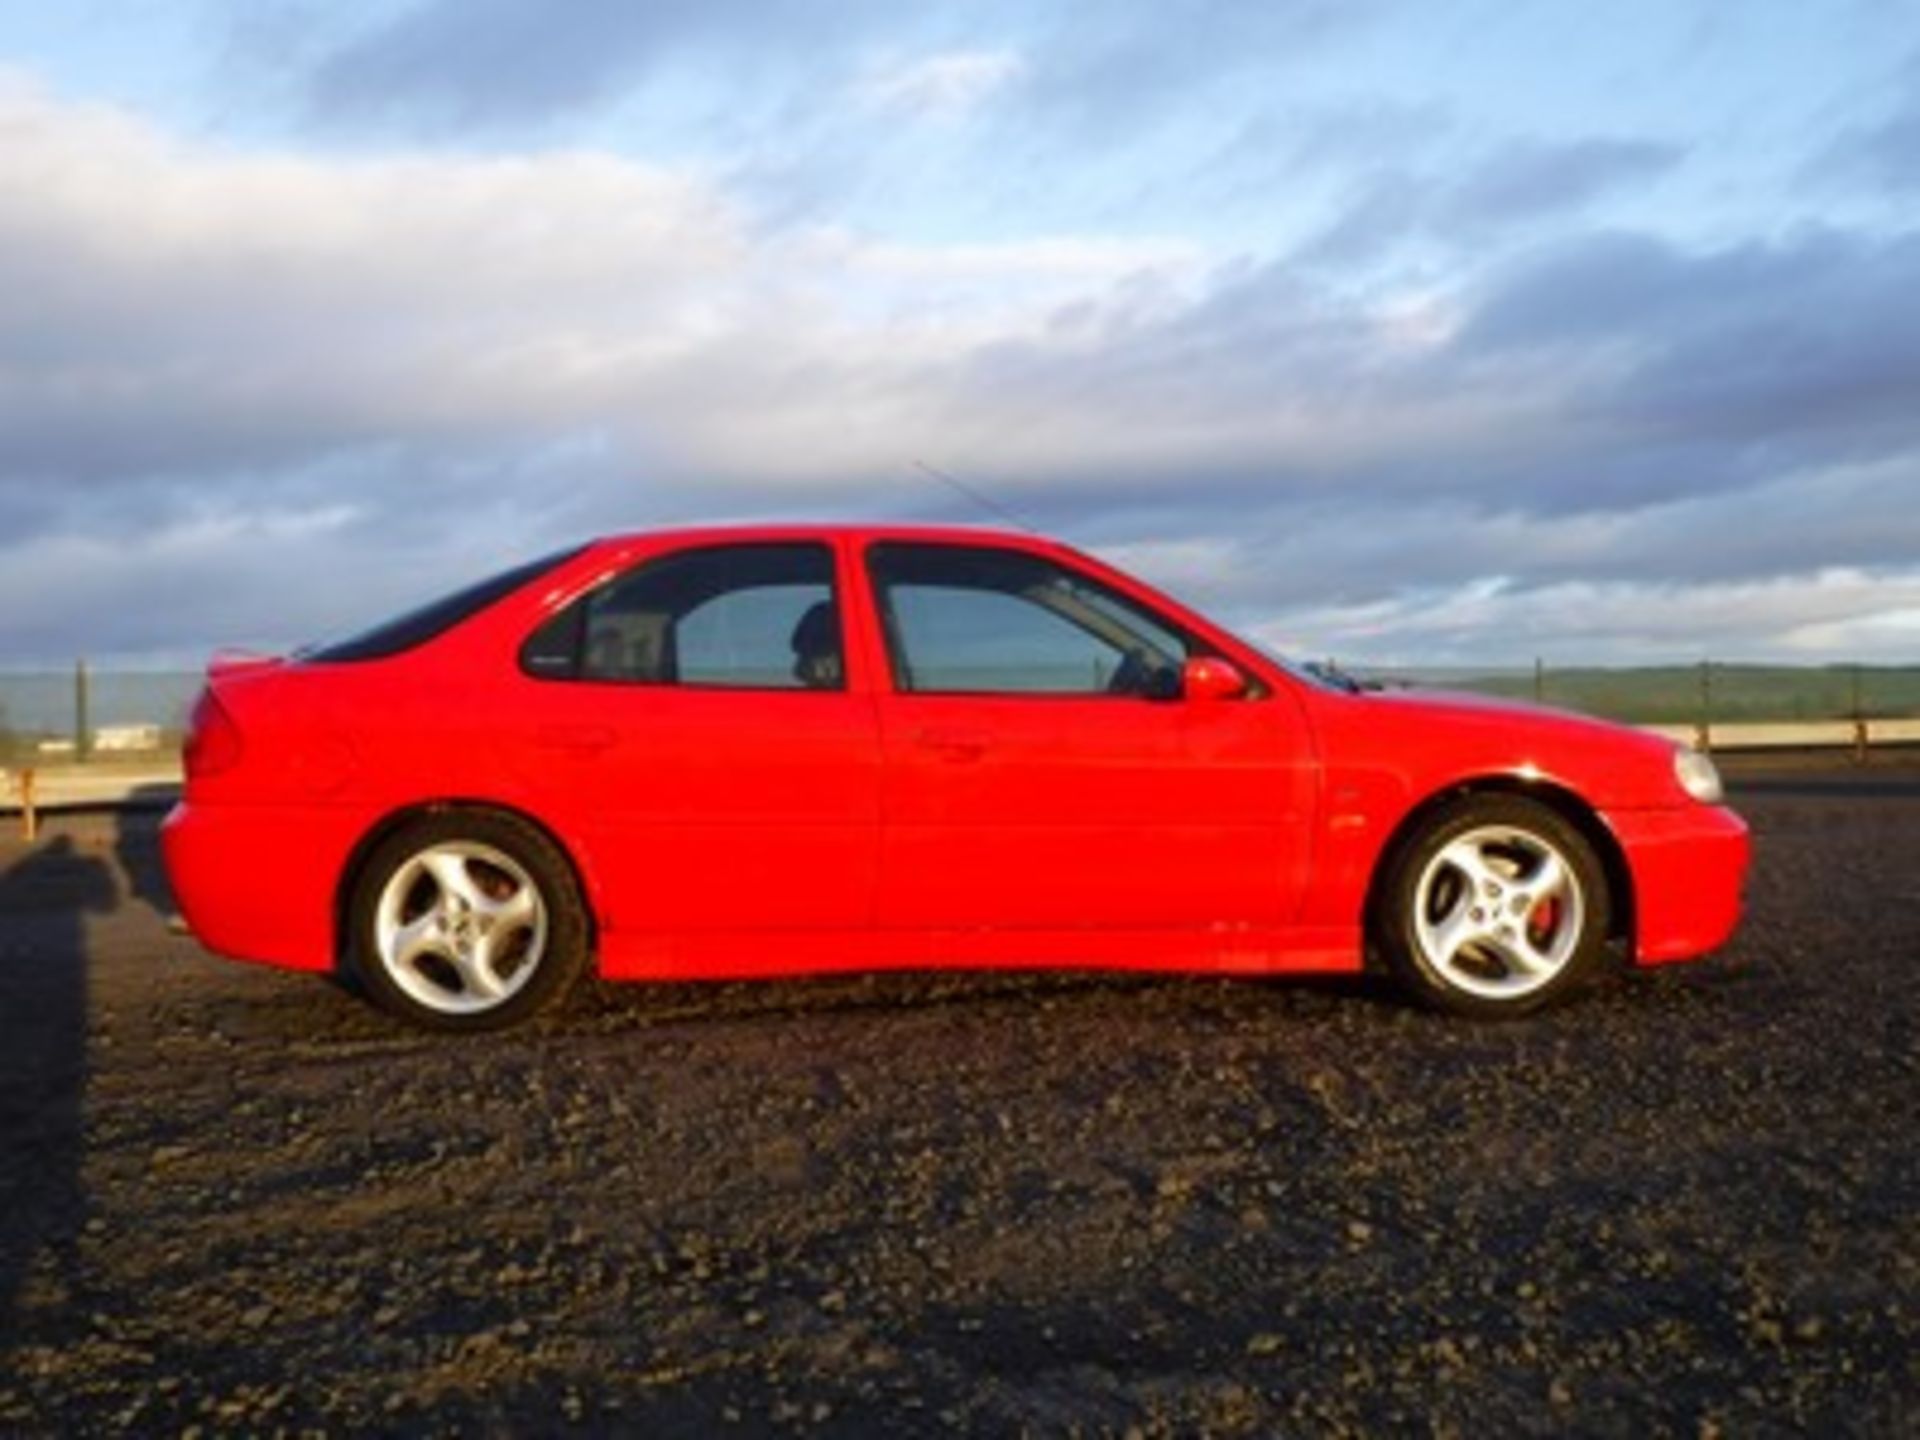 FORD MONDEO ST 24 V6 - 2497cc - Image 8 of 24